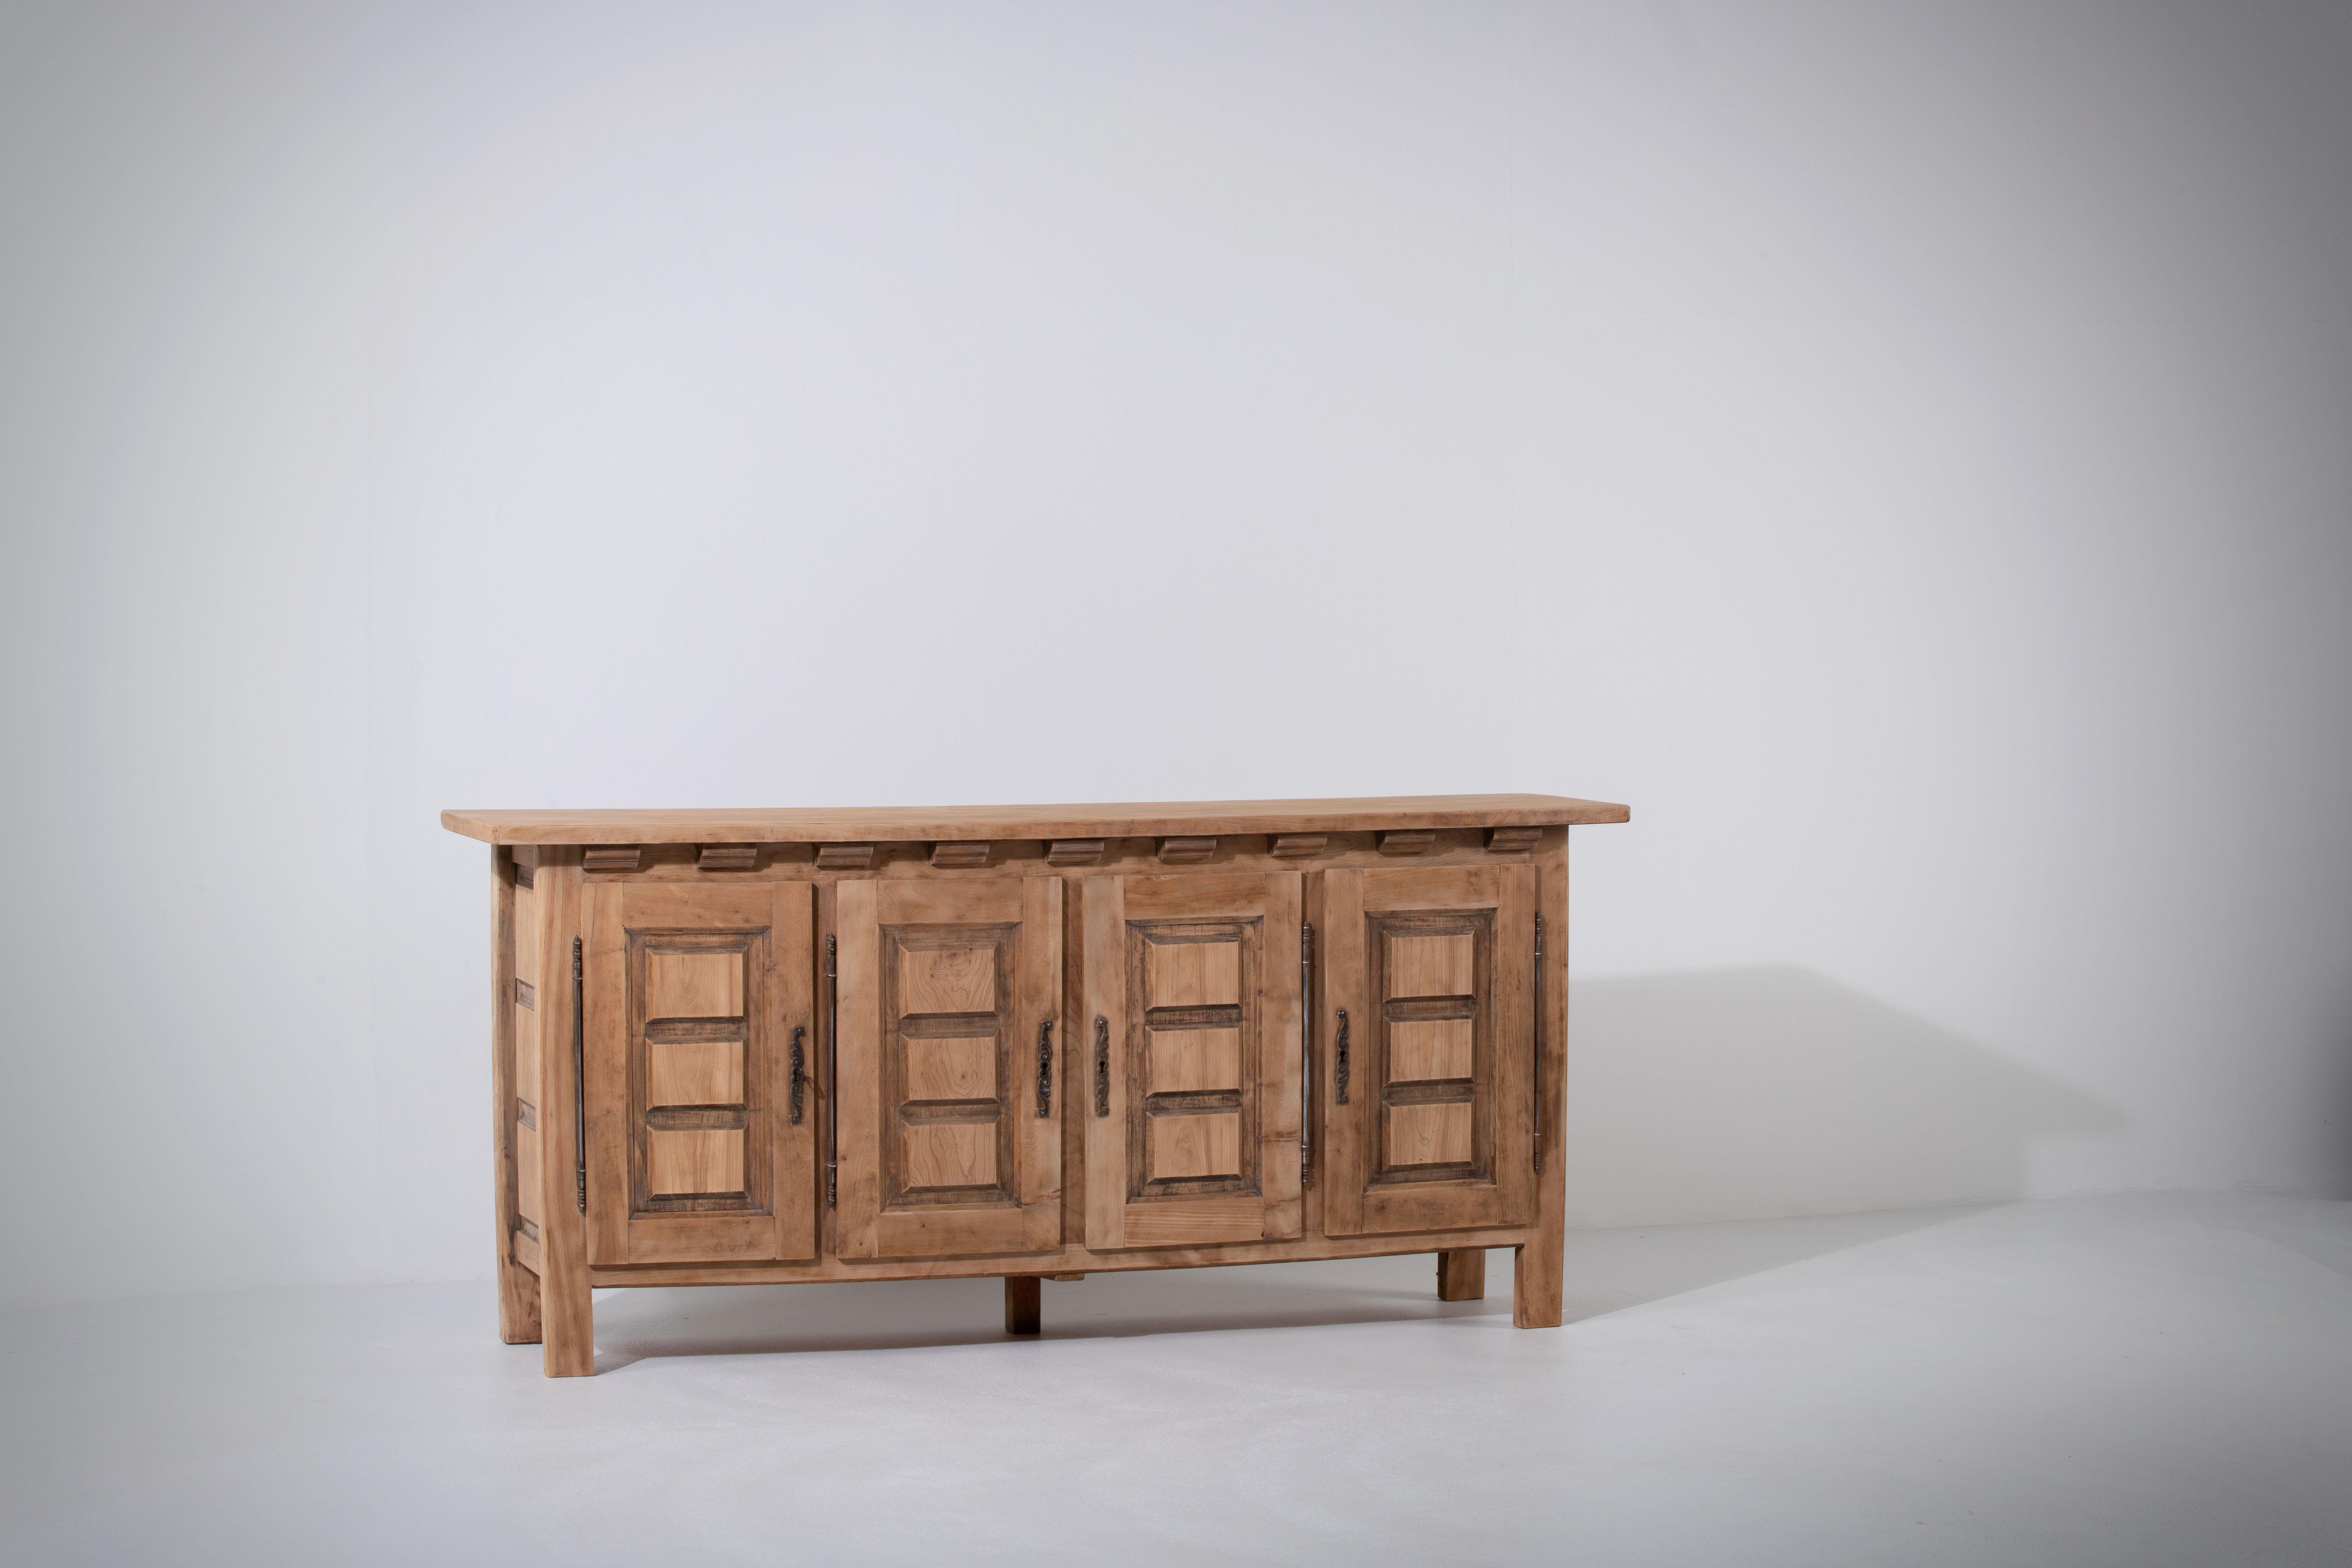 Presenting a noteworthy four-door sideboard, exuding an Alpine Chalet style, crafted from solid elm and discovered in the Maritime Alps. This unique cabinet, originating from the 1960s, harmoniously merges functionality with striking design, making